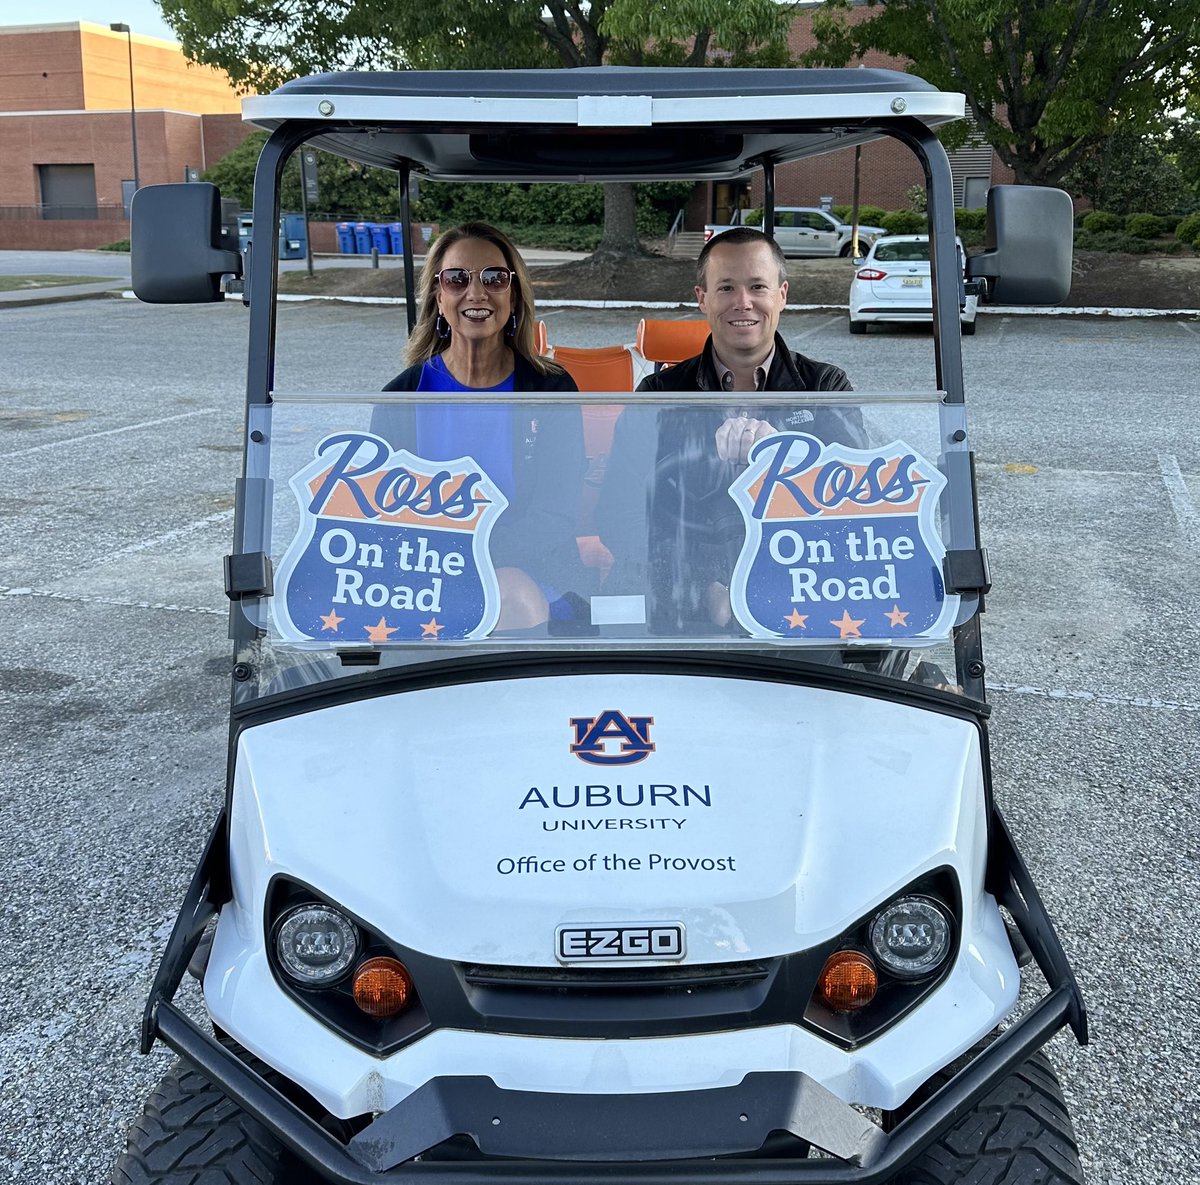 It’s P1 Finals Week! Dr. Fox and I are out and about to make sure you arrive in style. Wave us down for a ride!